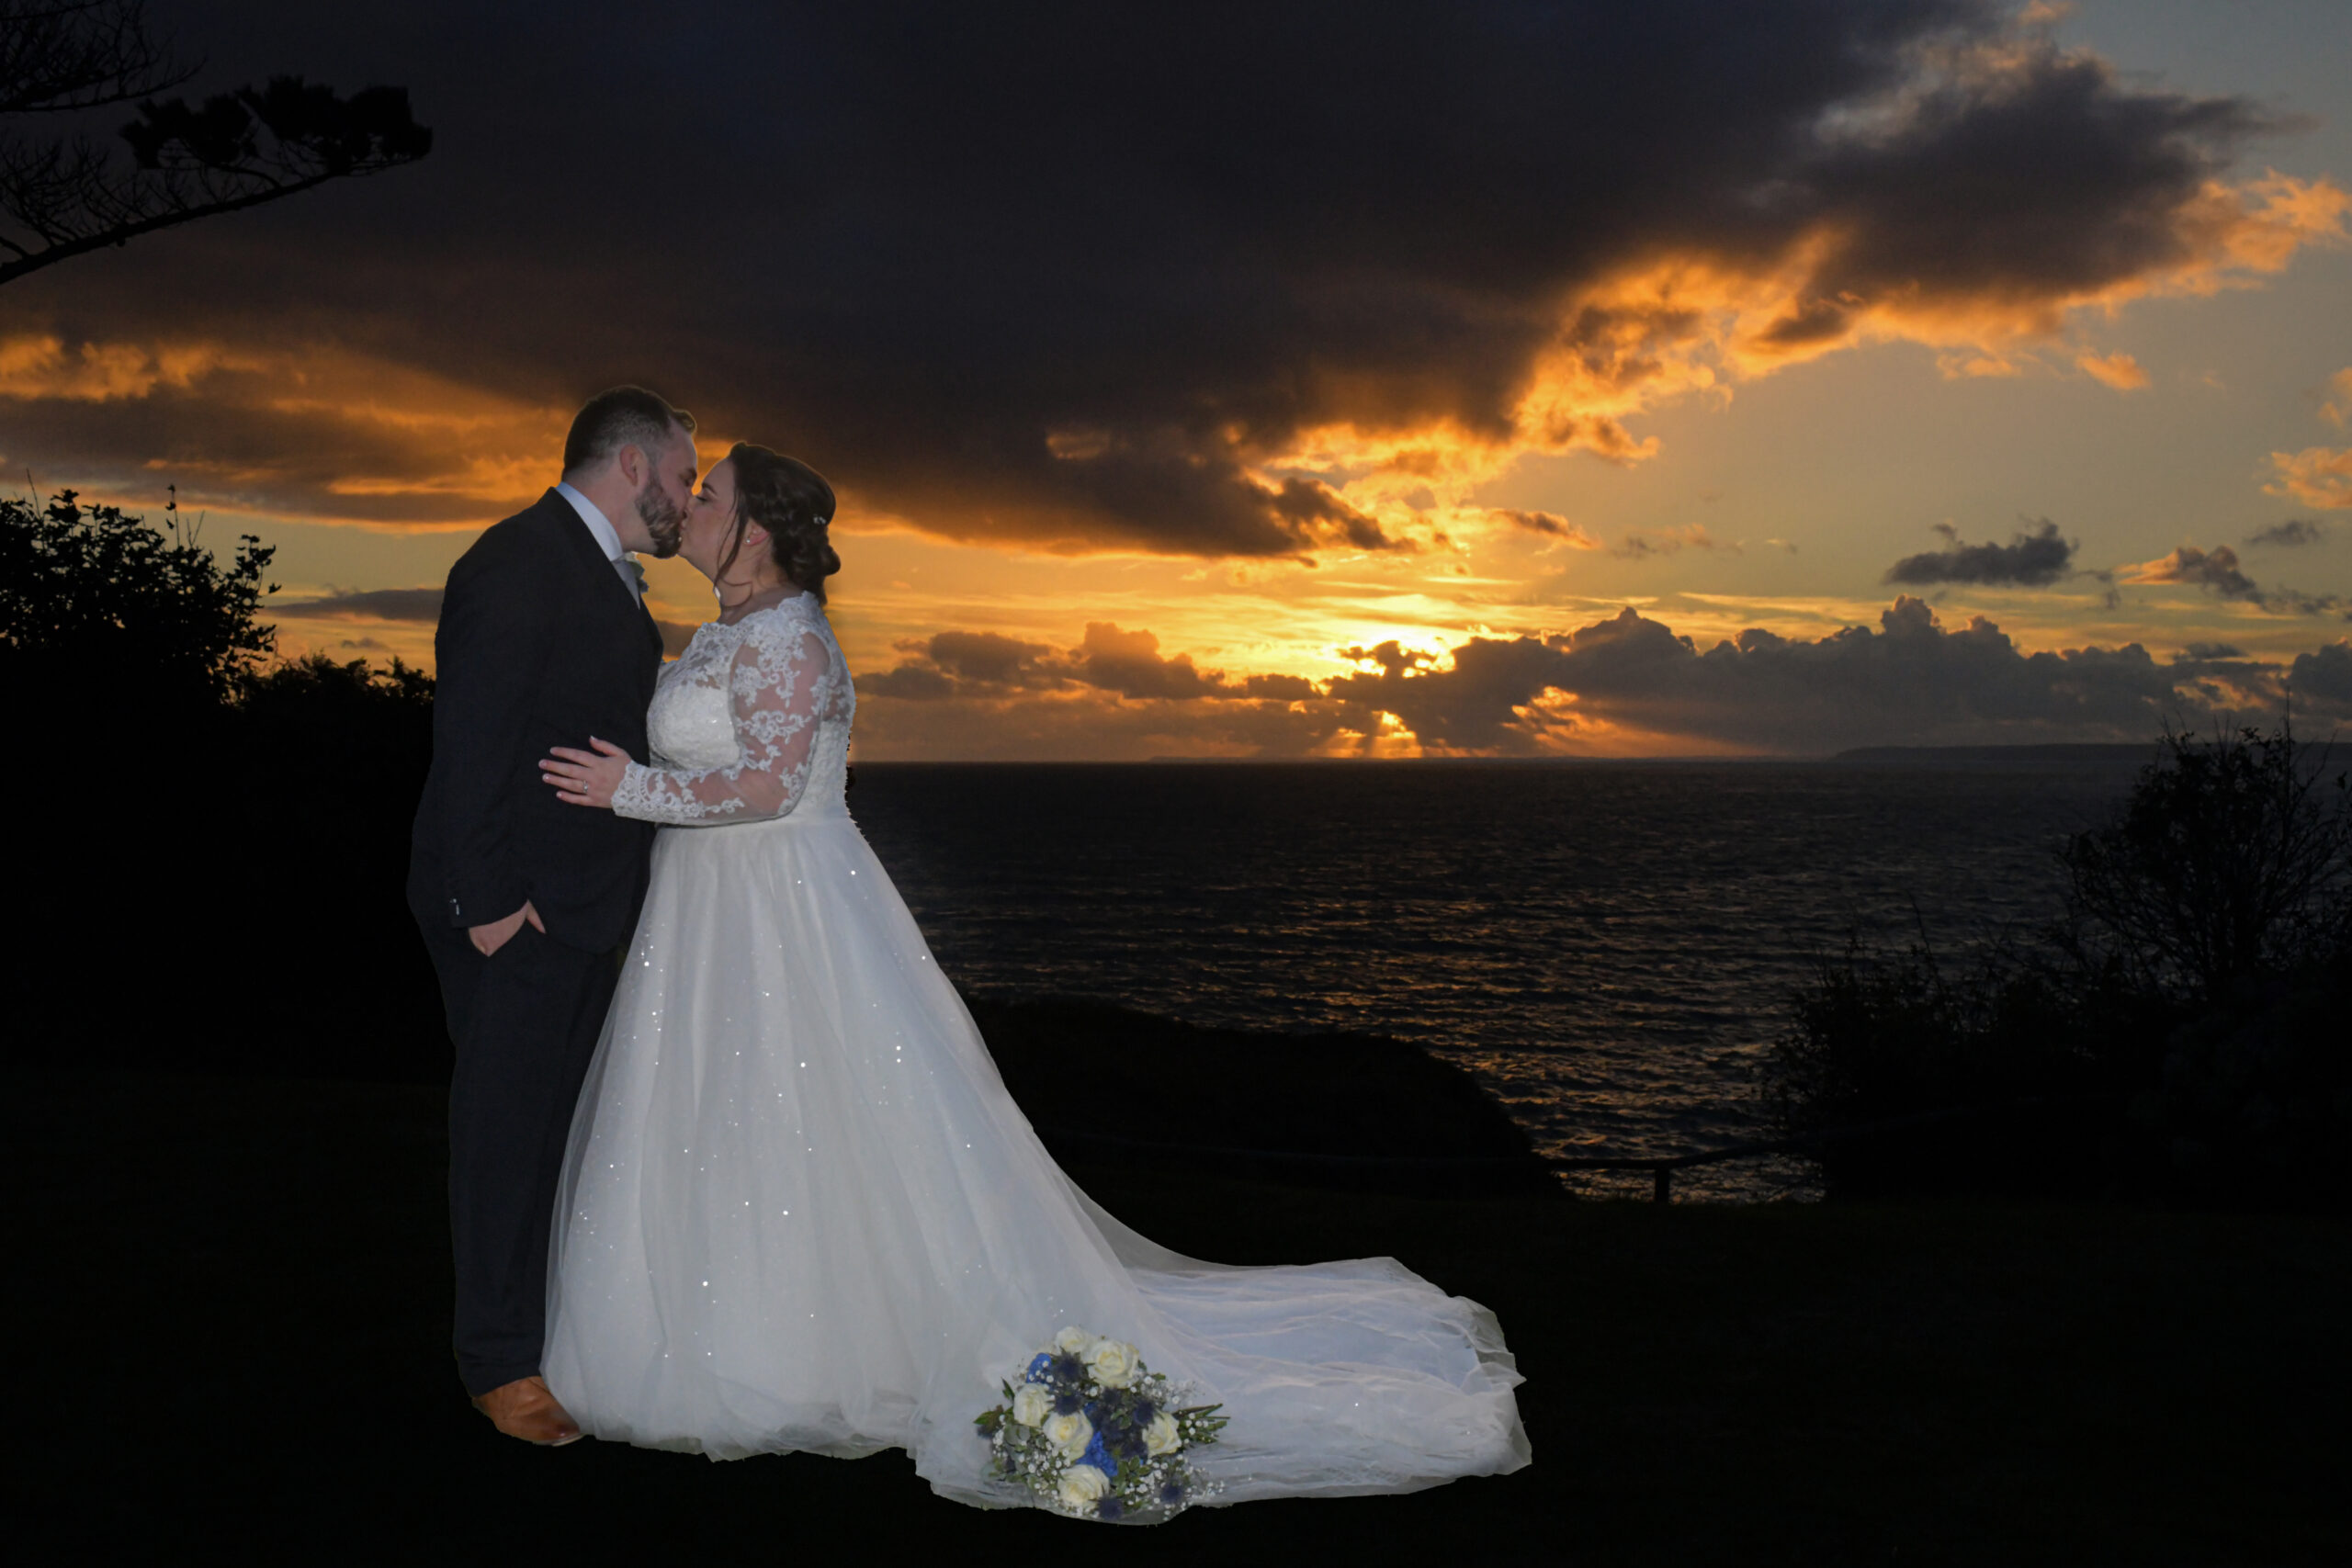 Sunset Wedding Photography at Polhawn Fort